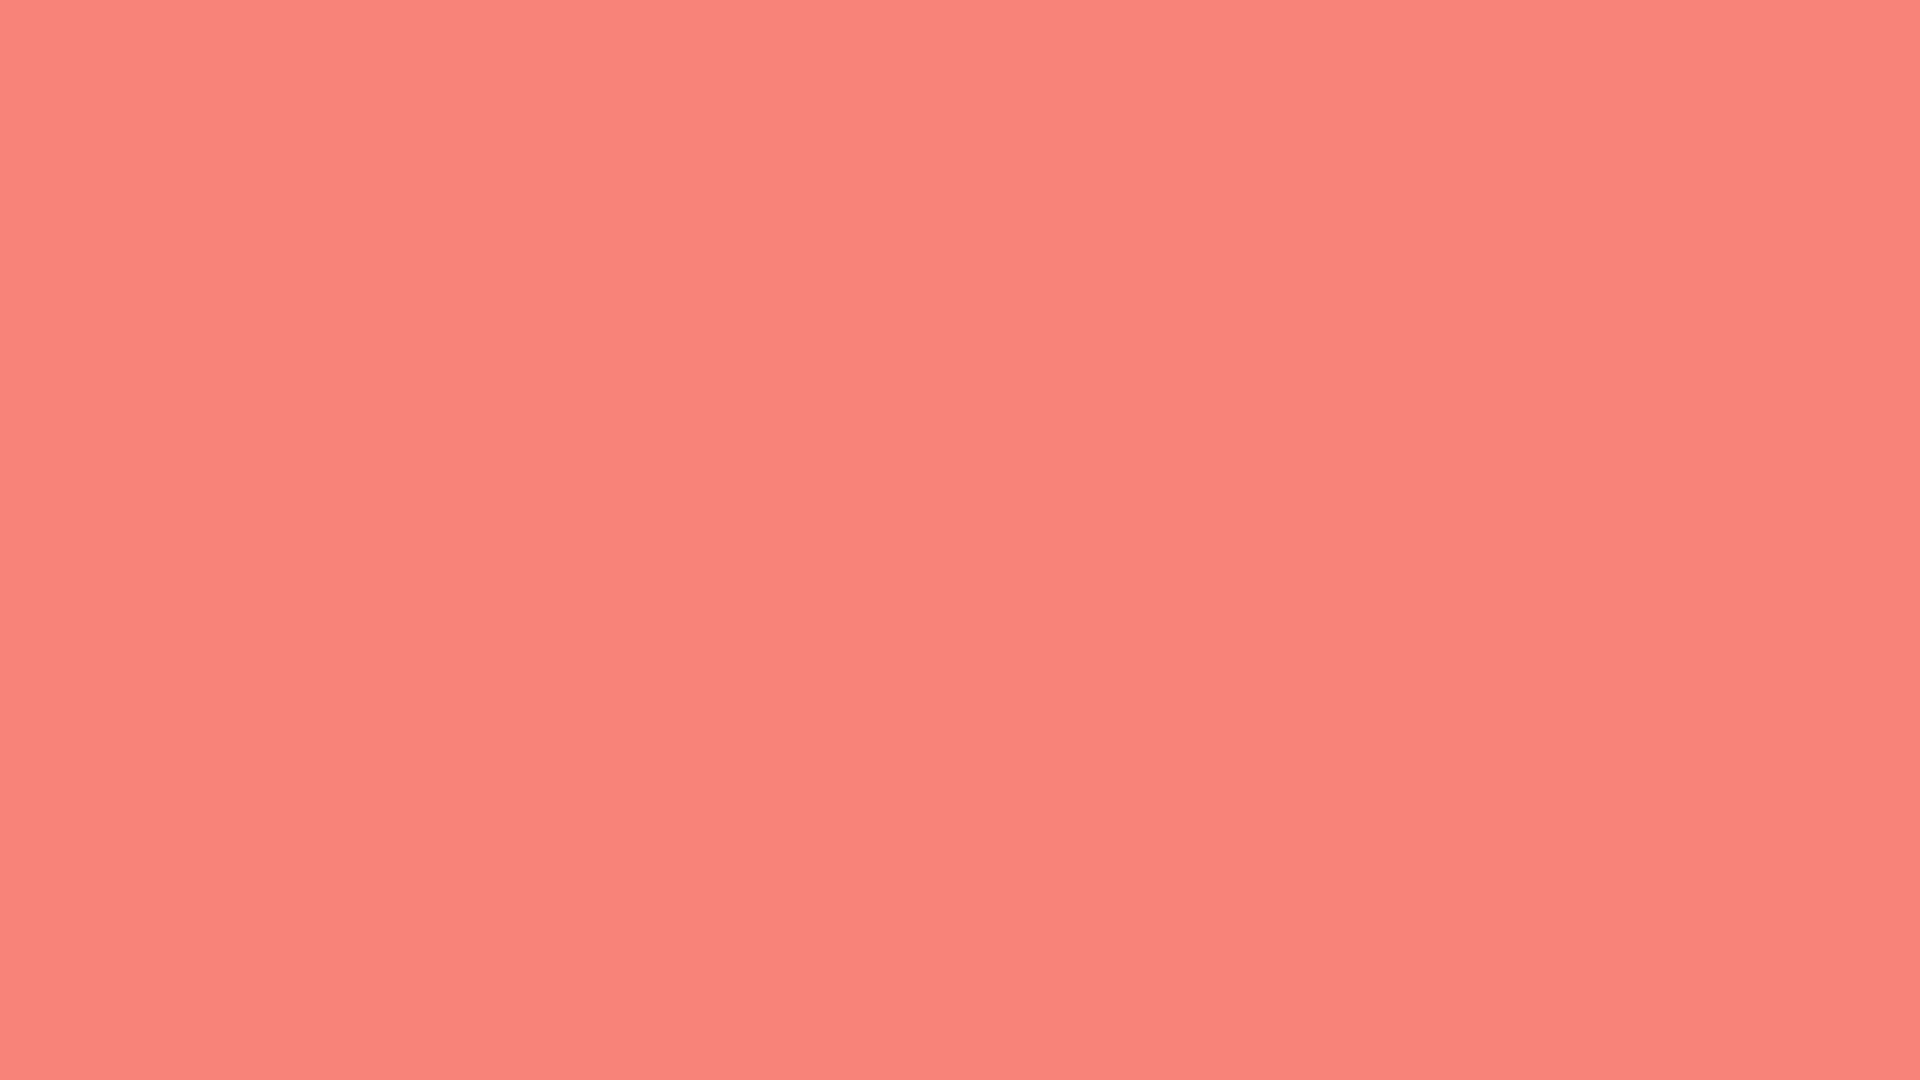 Premium collection of Background pink coral For your design needs